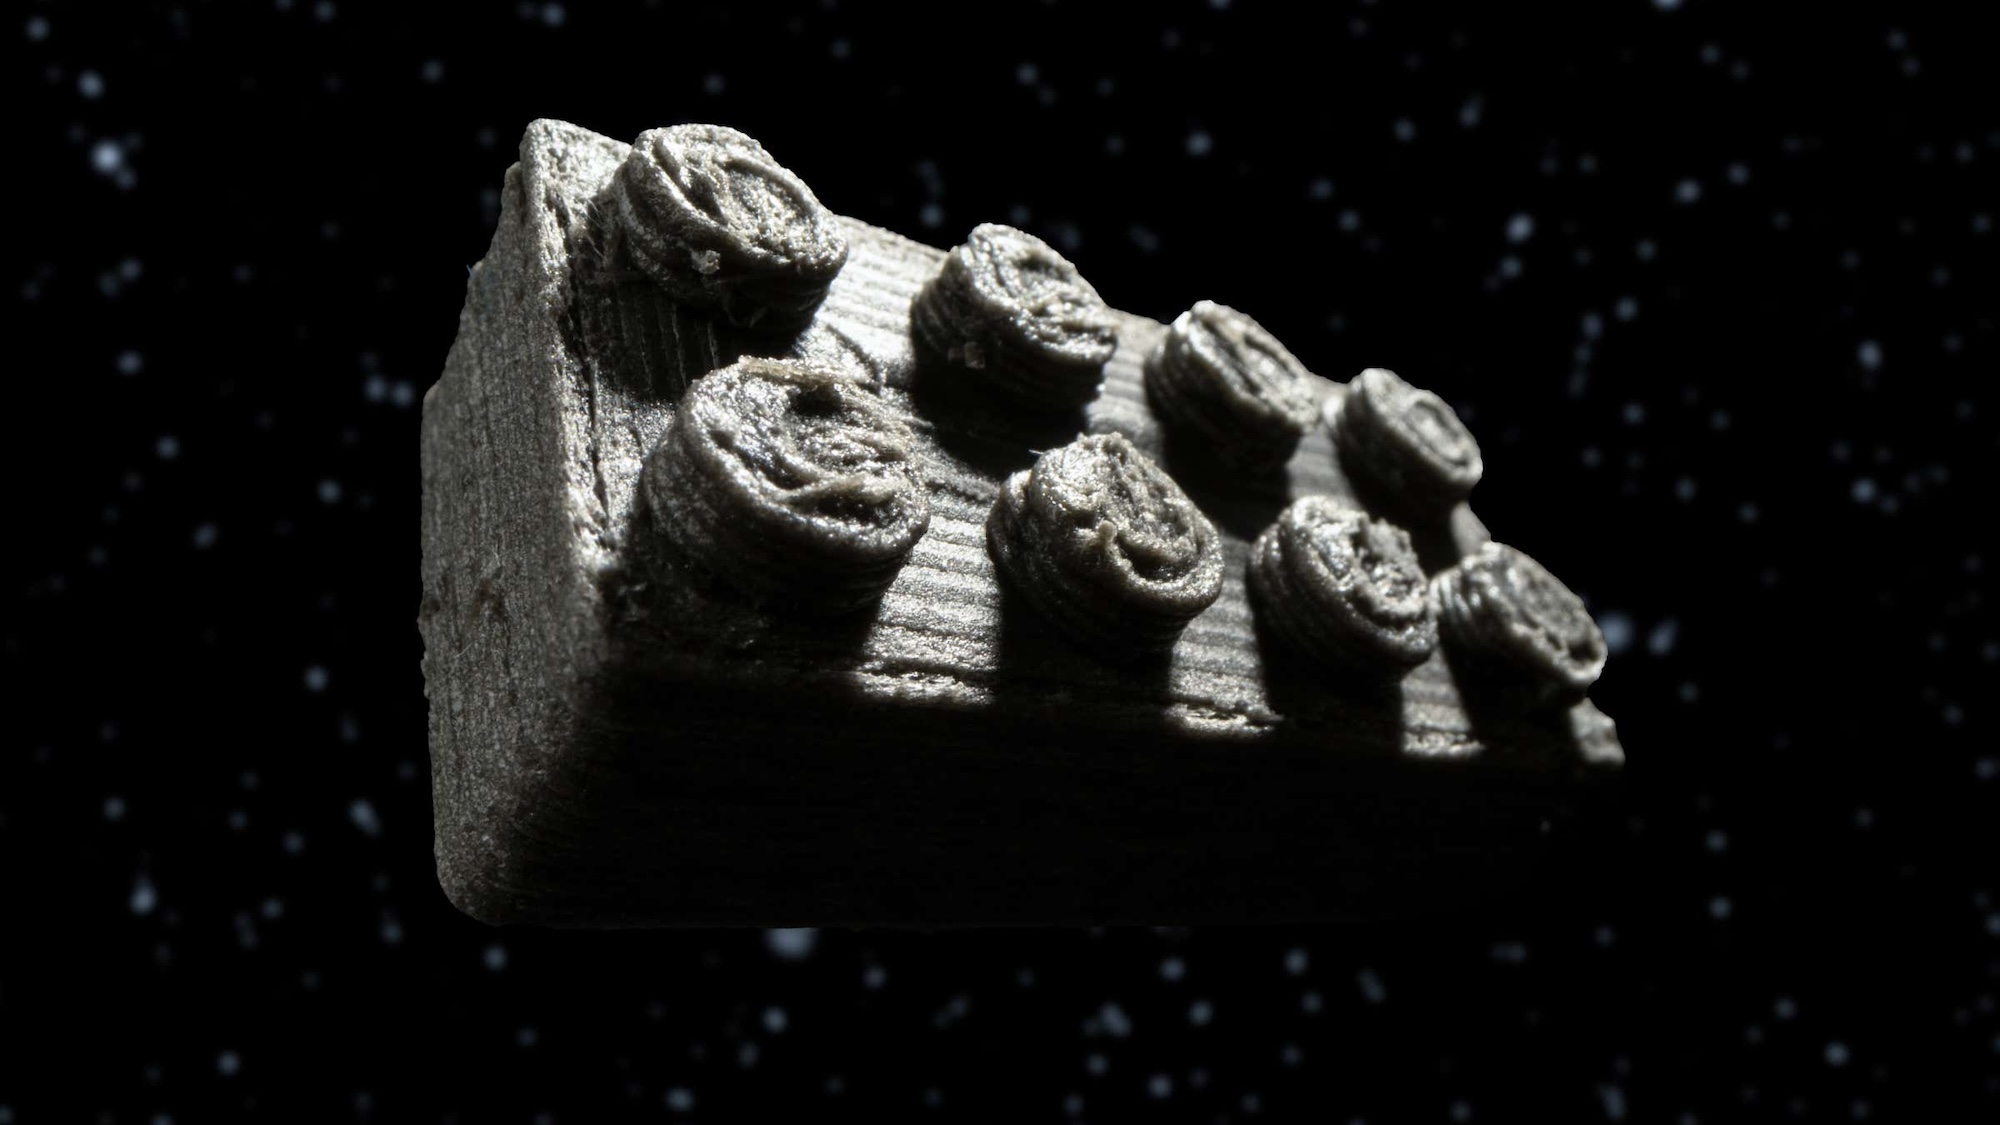 3D printed Lego moon brick made from meteorite dust against space background